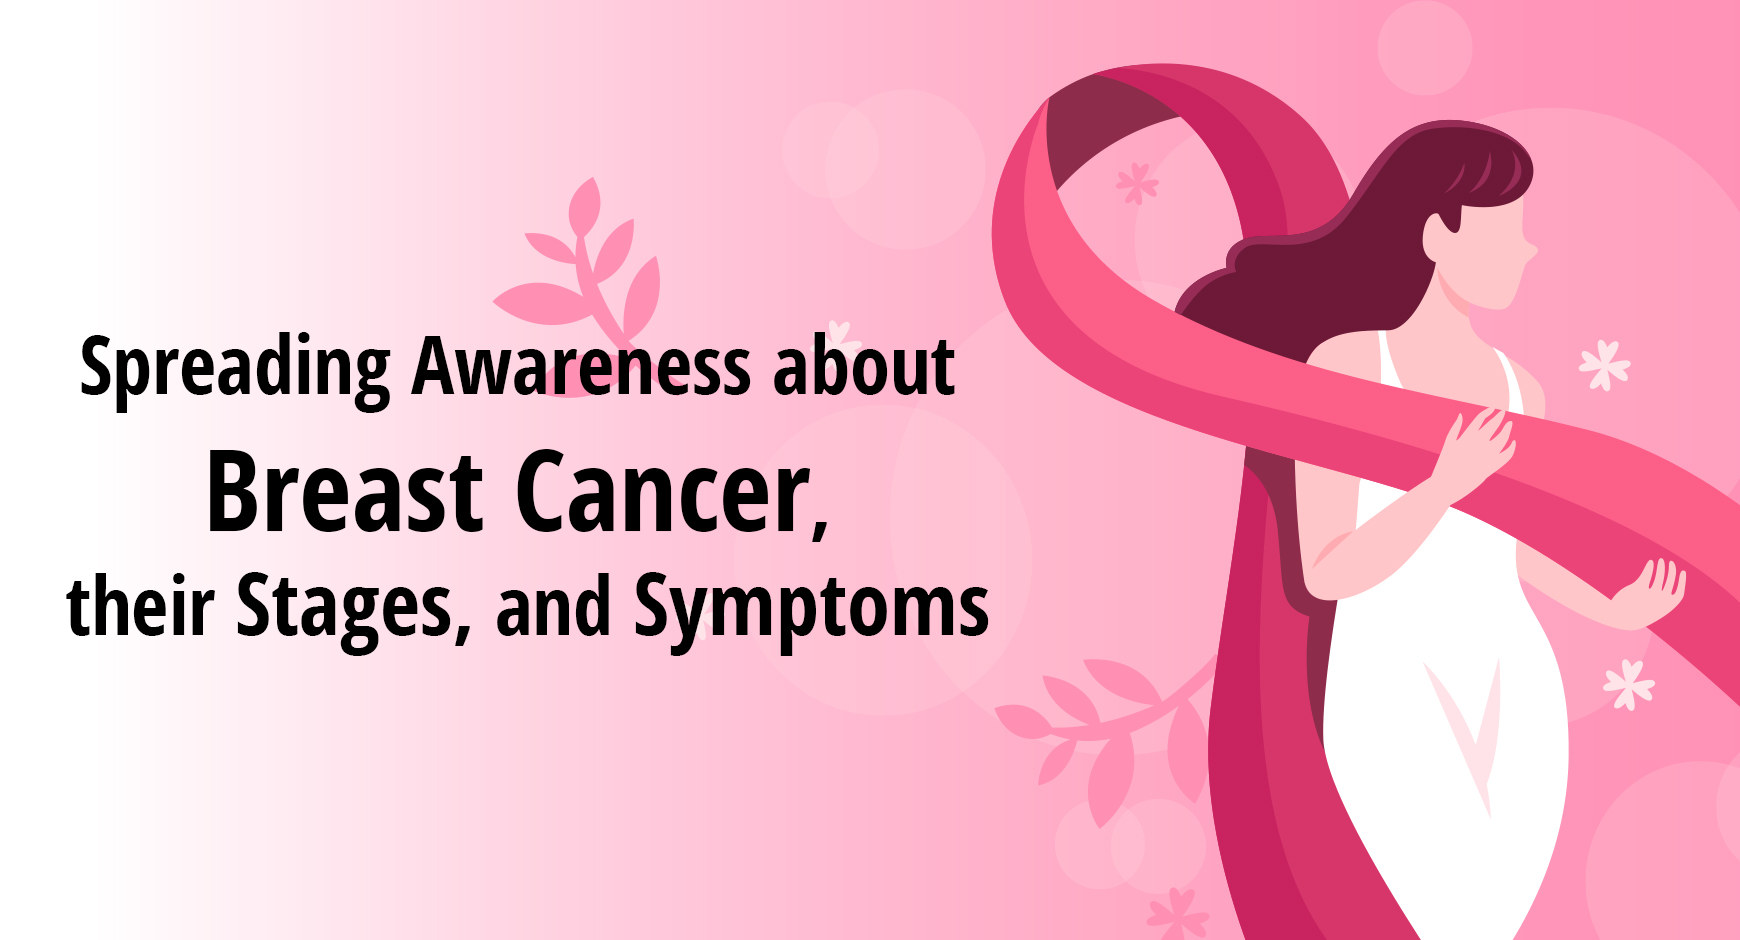 Spreading Awareness About Breast Cancer, Their Stages, and Symptoms